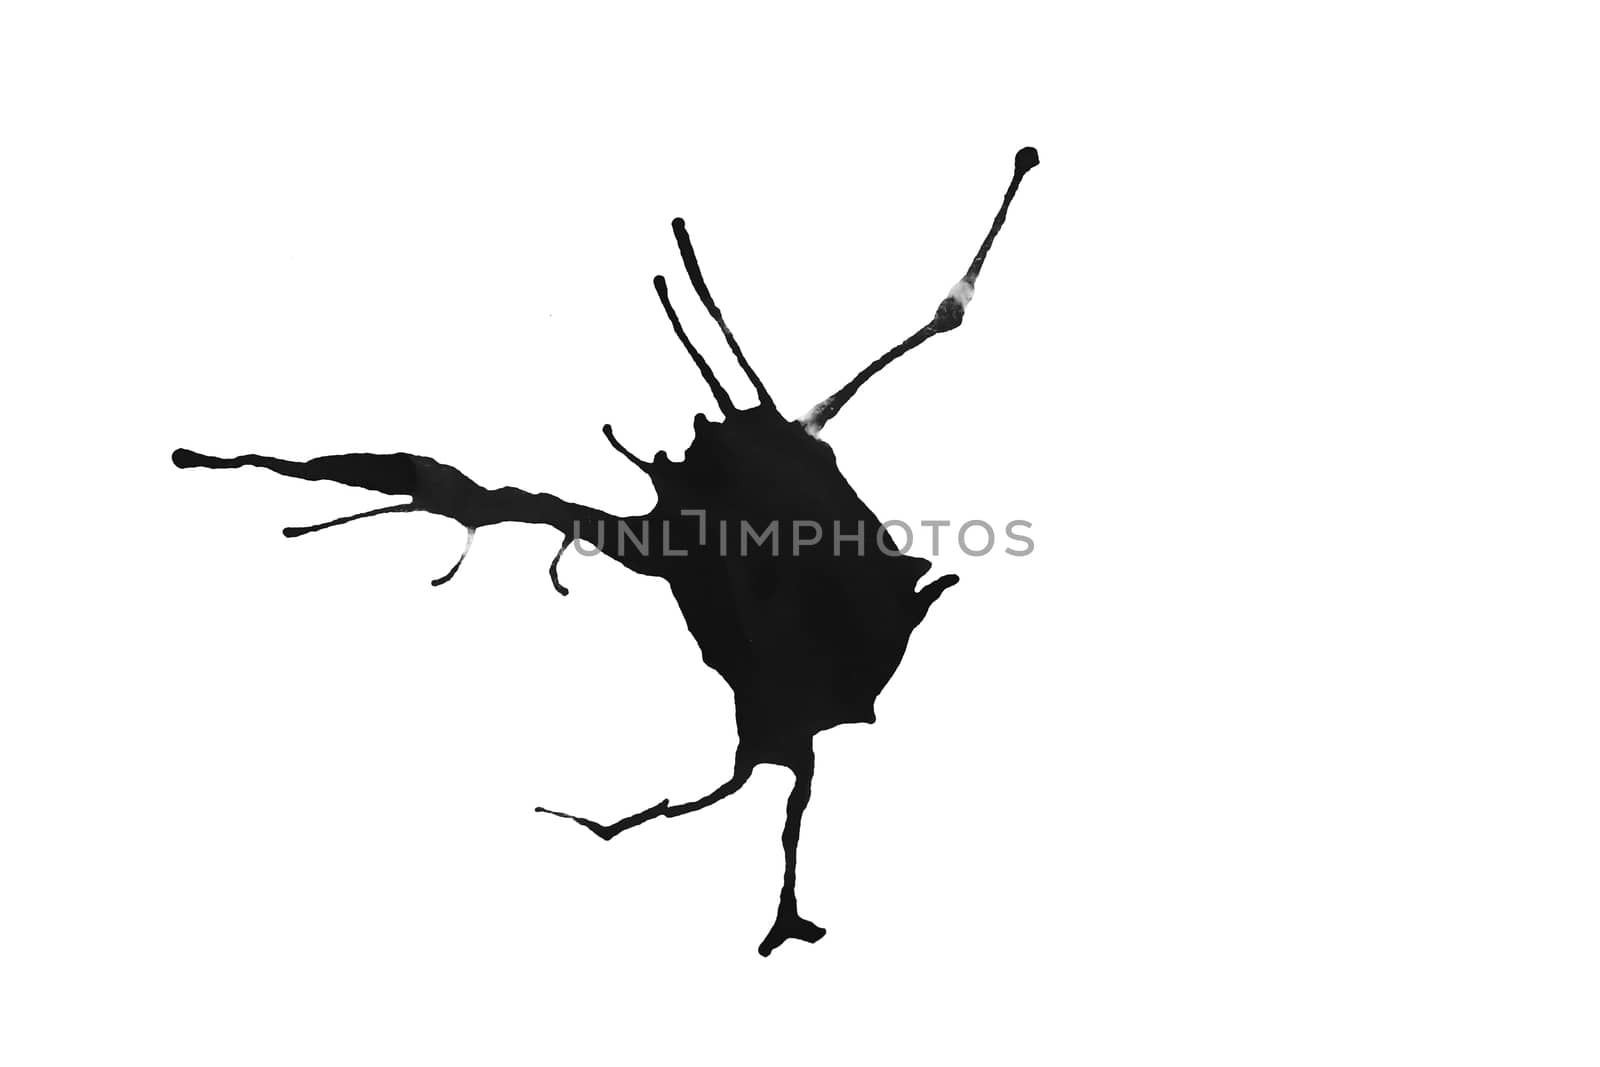 Abstract Ink splash isolate on white background